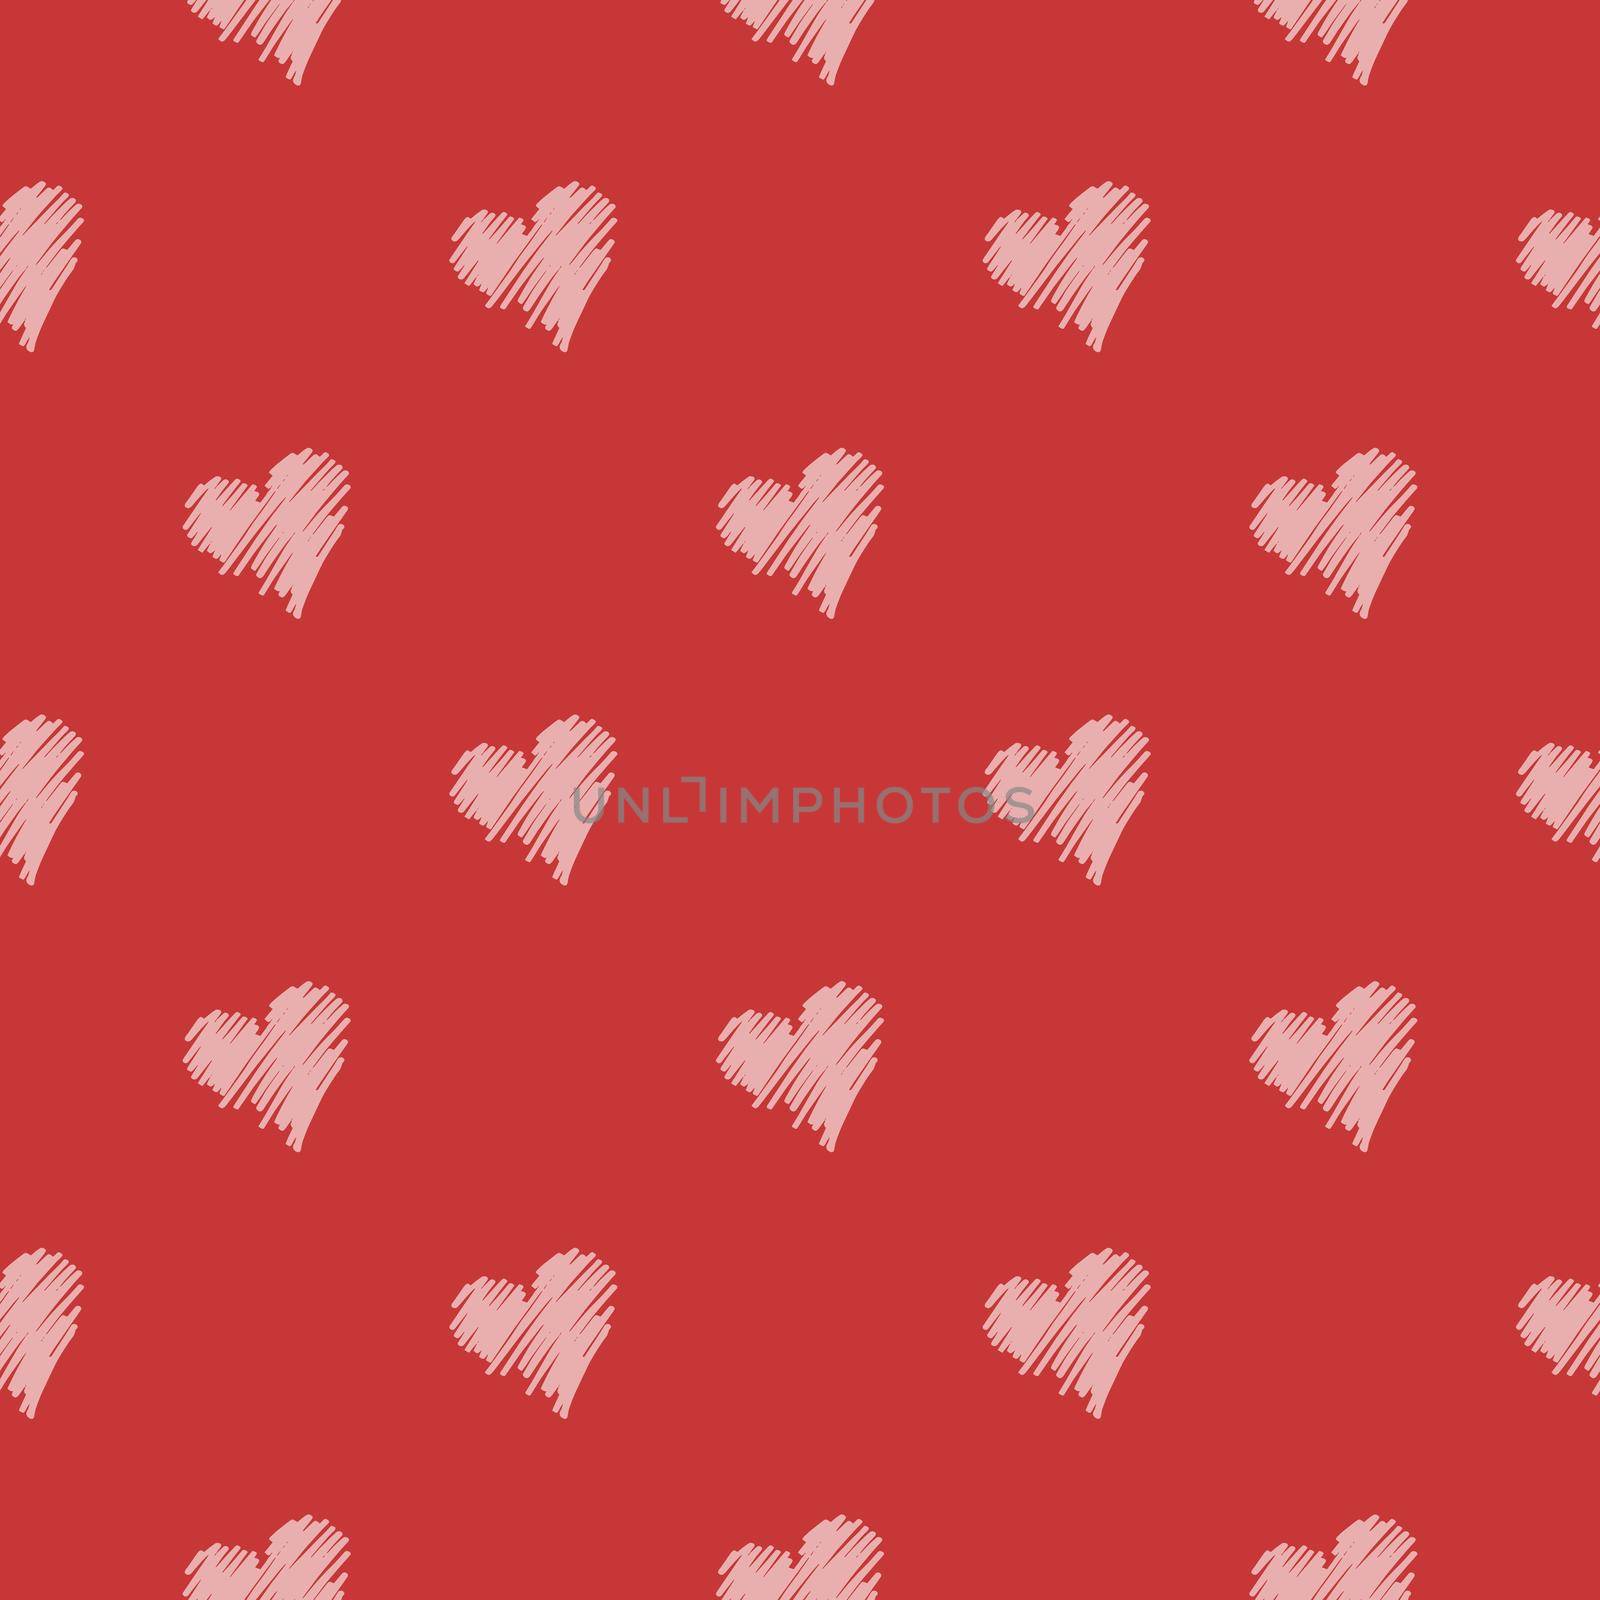 Semless heart shape pattern with colorful background